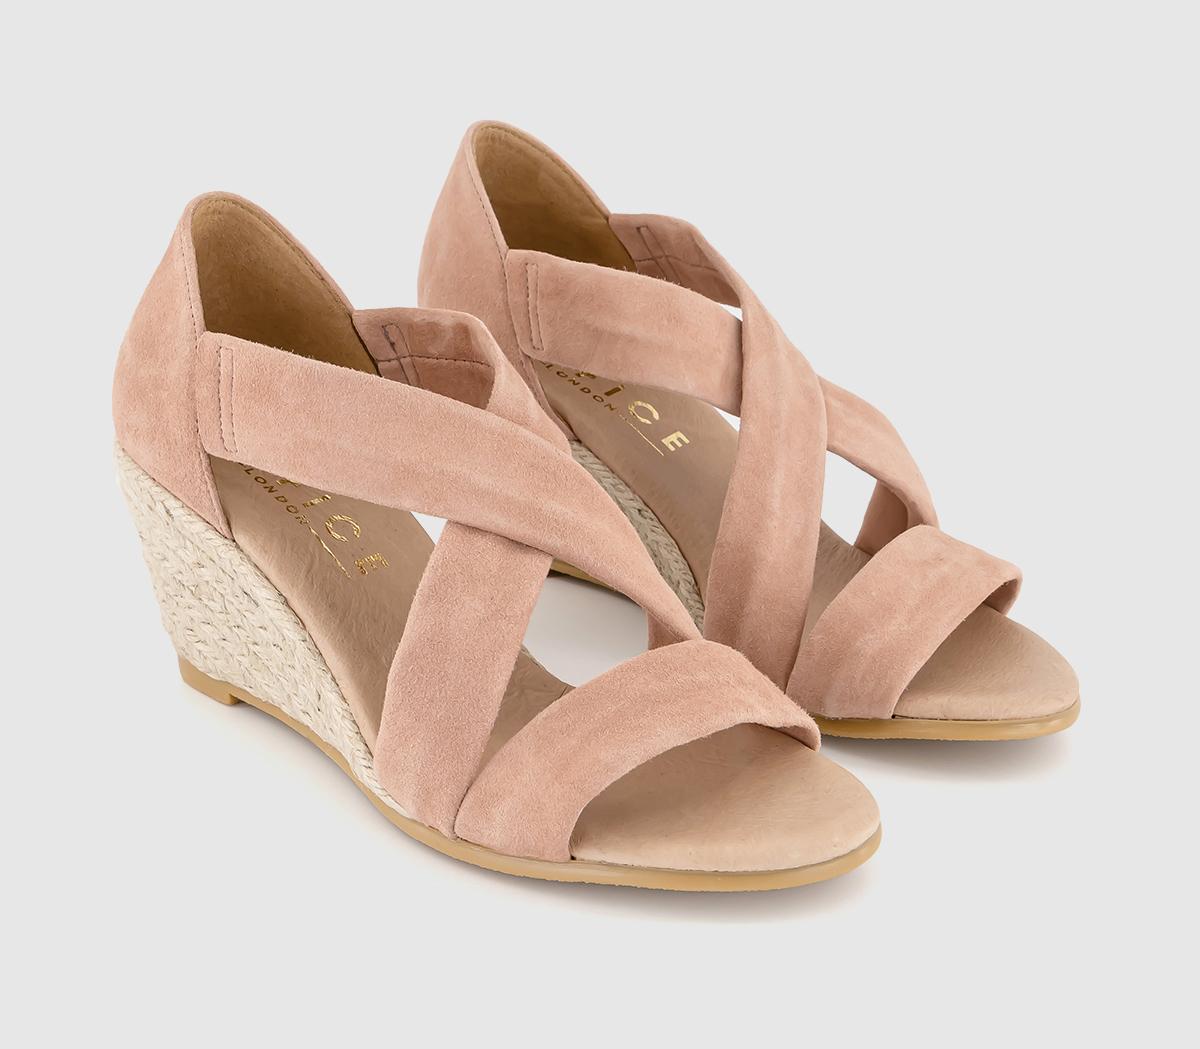 OFFICE Womens Women’s Pink Suede Nude Maiden Cross Strap Wedge Sandals, Size: 7